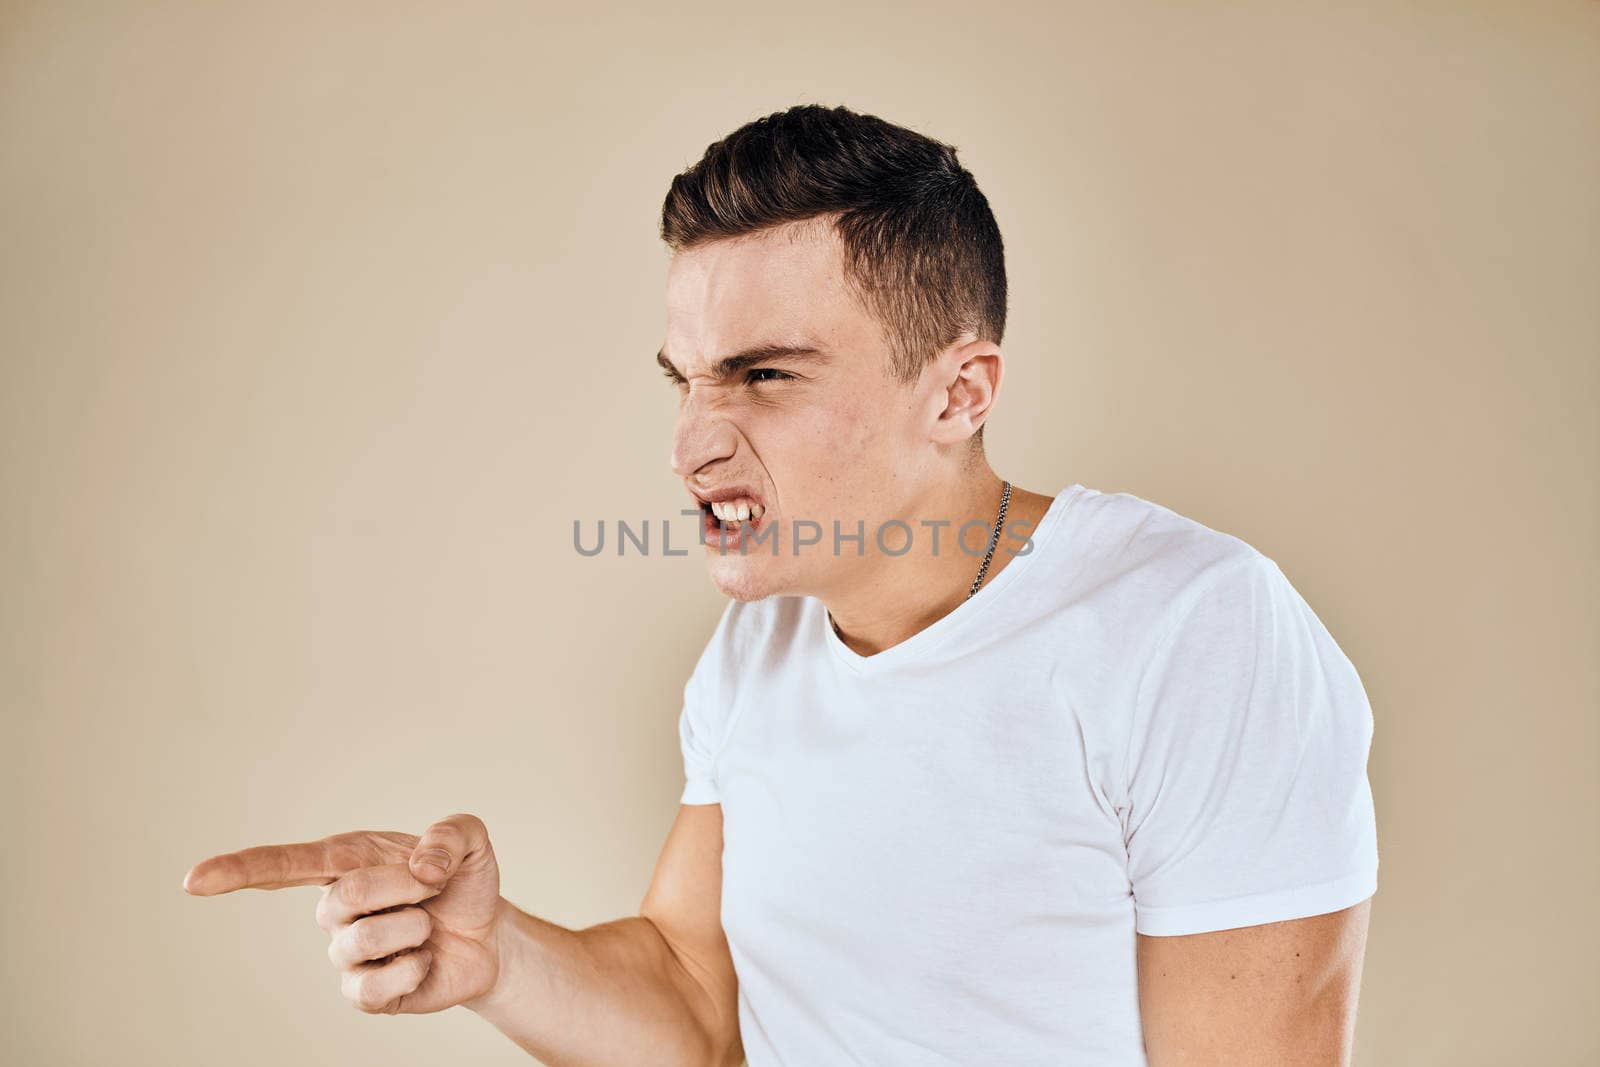 Man with displeased facial expression emotions white t-shirt gestures with hands beige background. High quality photo